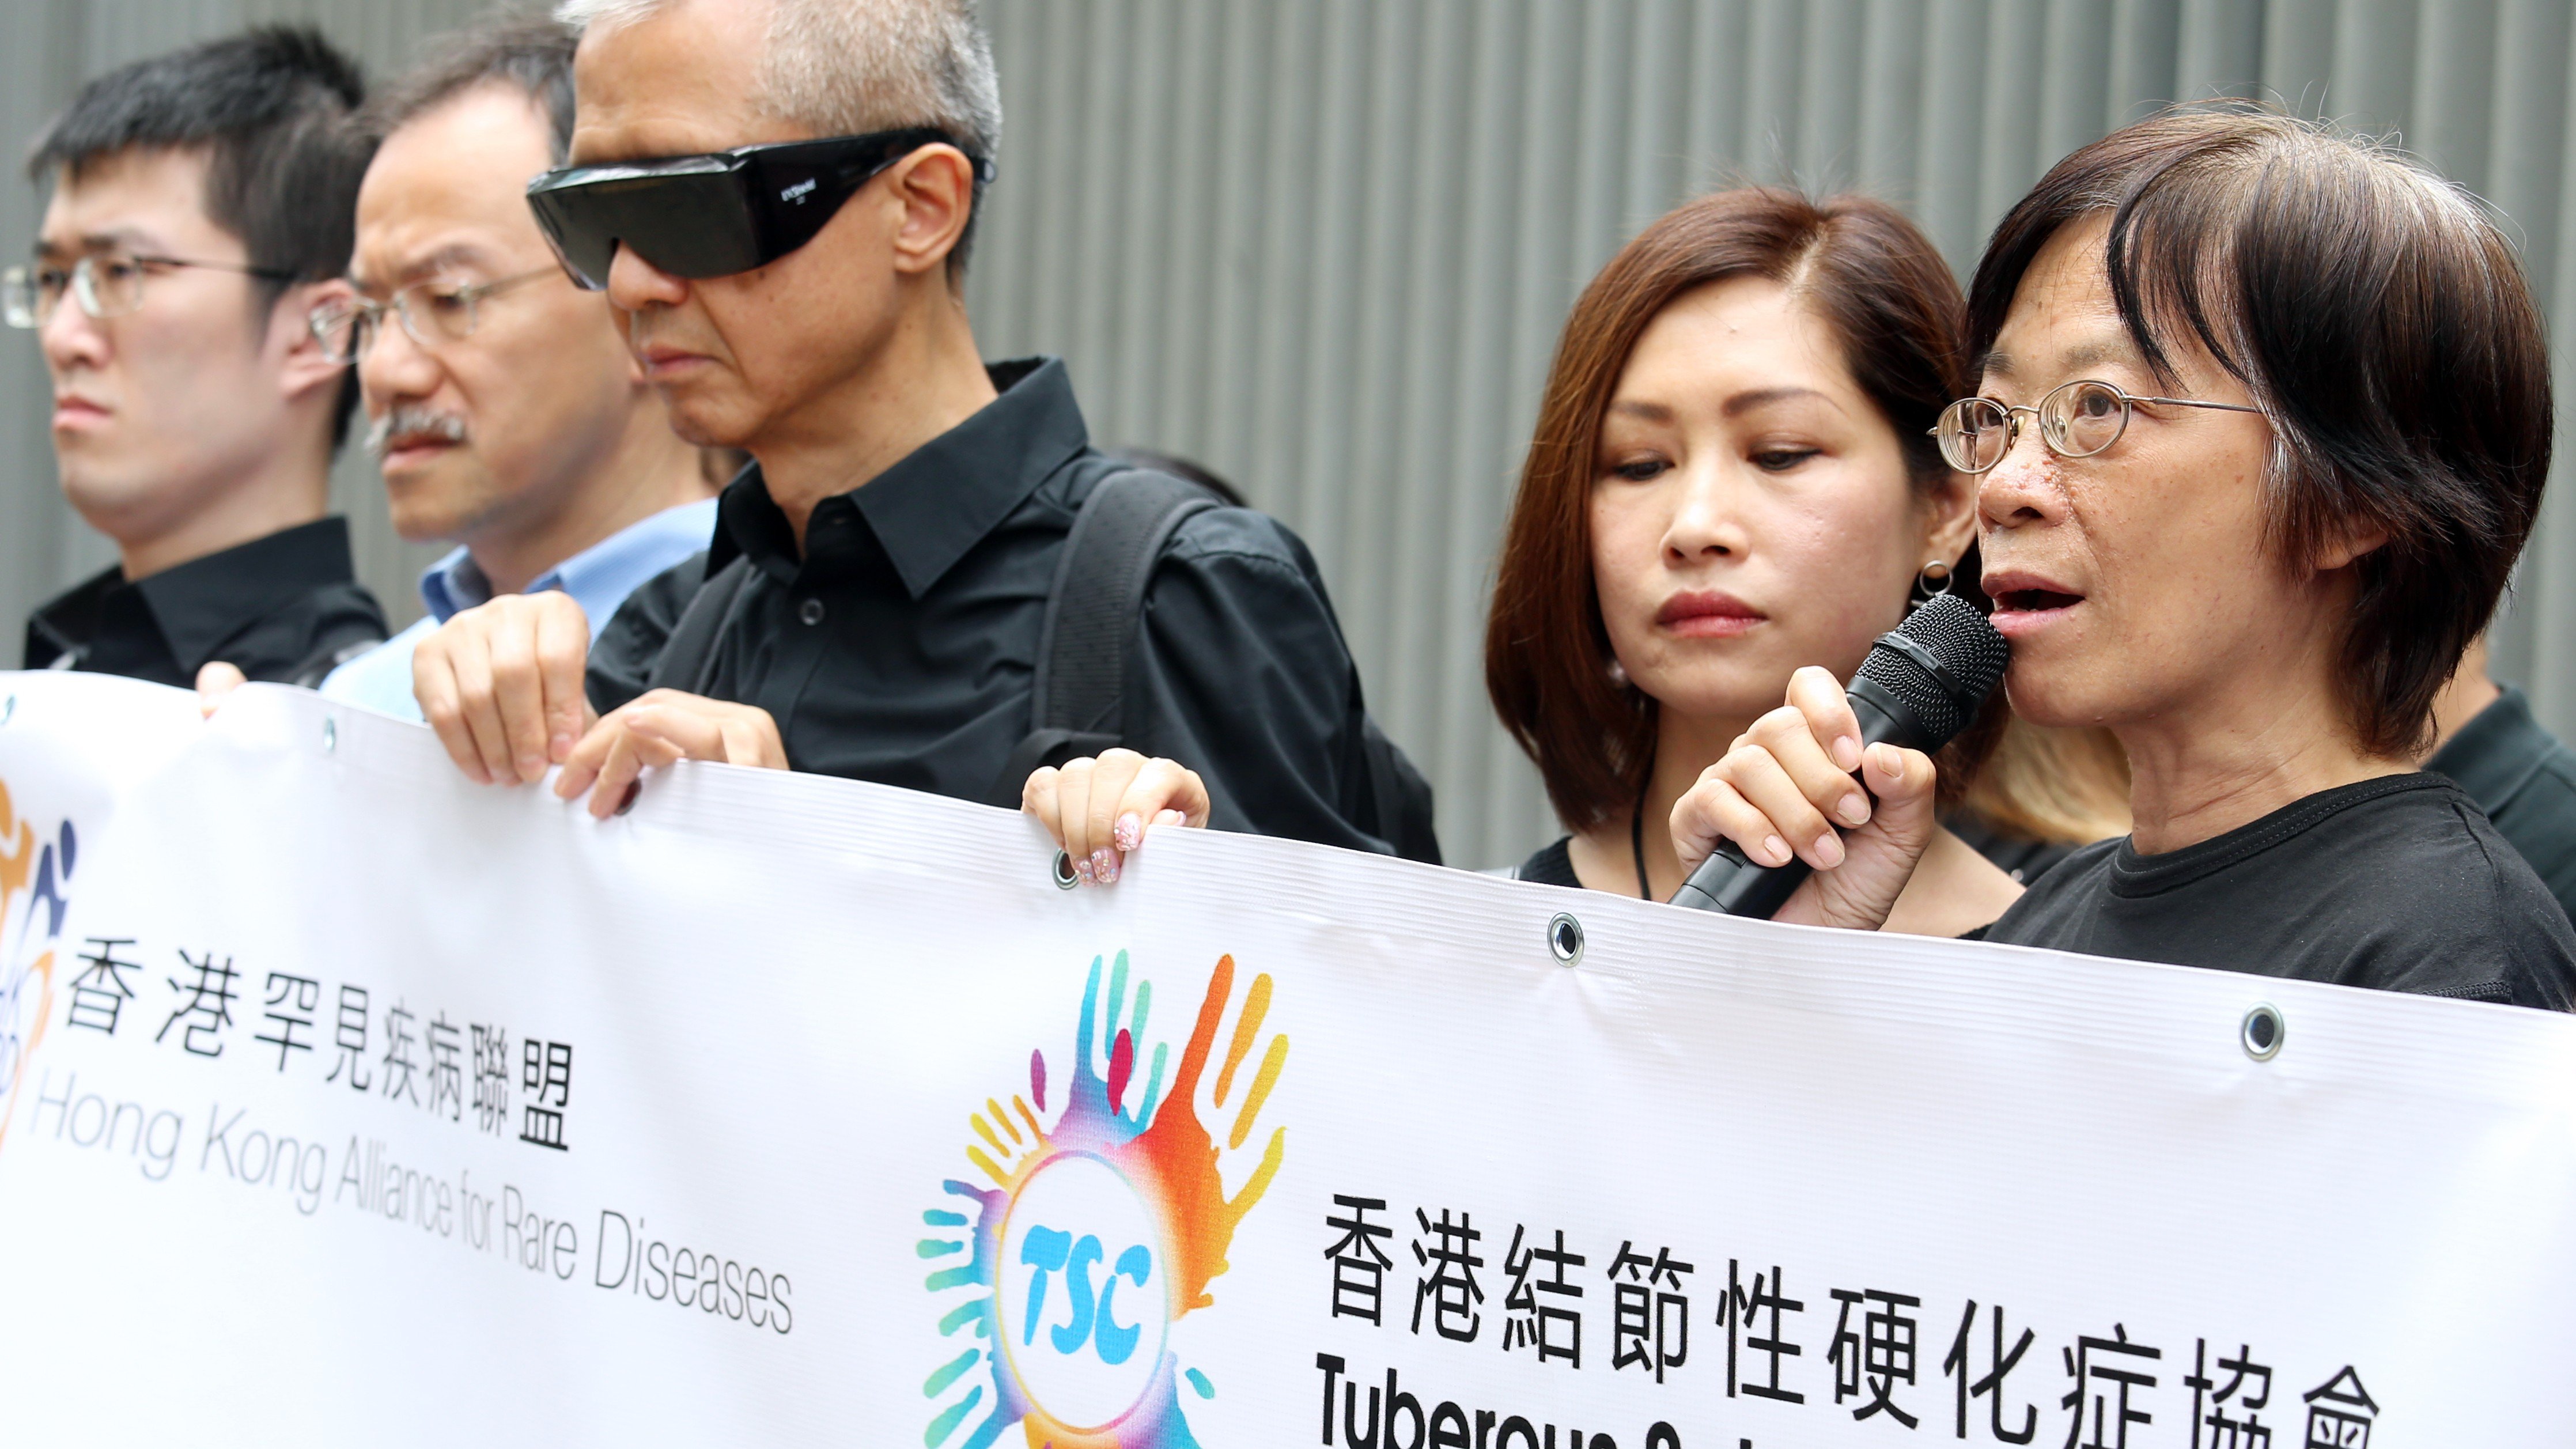 The president of the Hong Kong Alliance for Rare Diseases, Tsang Kin-ping (wearing glasses), Rebecca Yuen Pui-ling, from the Tuberous Sclerosis Complex Association of Hong Kong (second from right), and patient Kong Wong Fung-ming rally outside the government headquarters in Tamar, calling on the Hospital Authority to subsidise drugs for rare diseases. Photo: David Wong